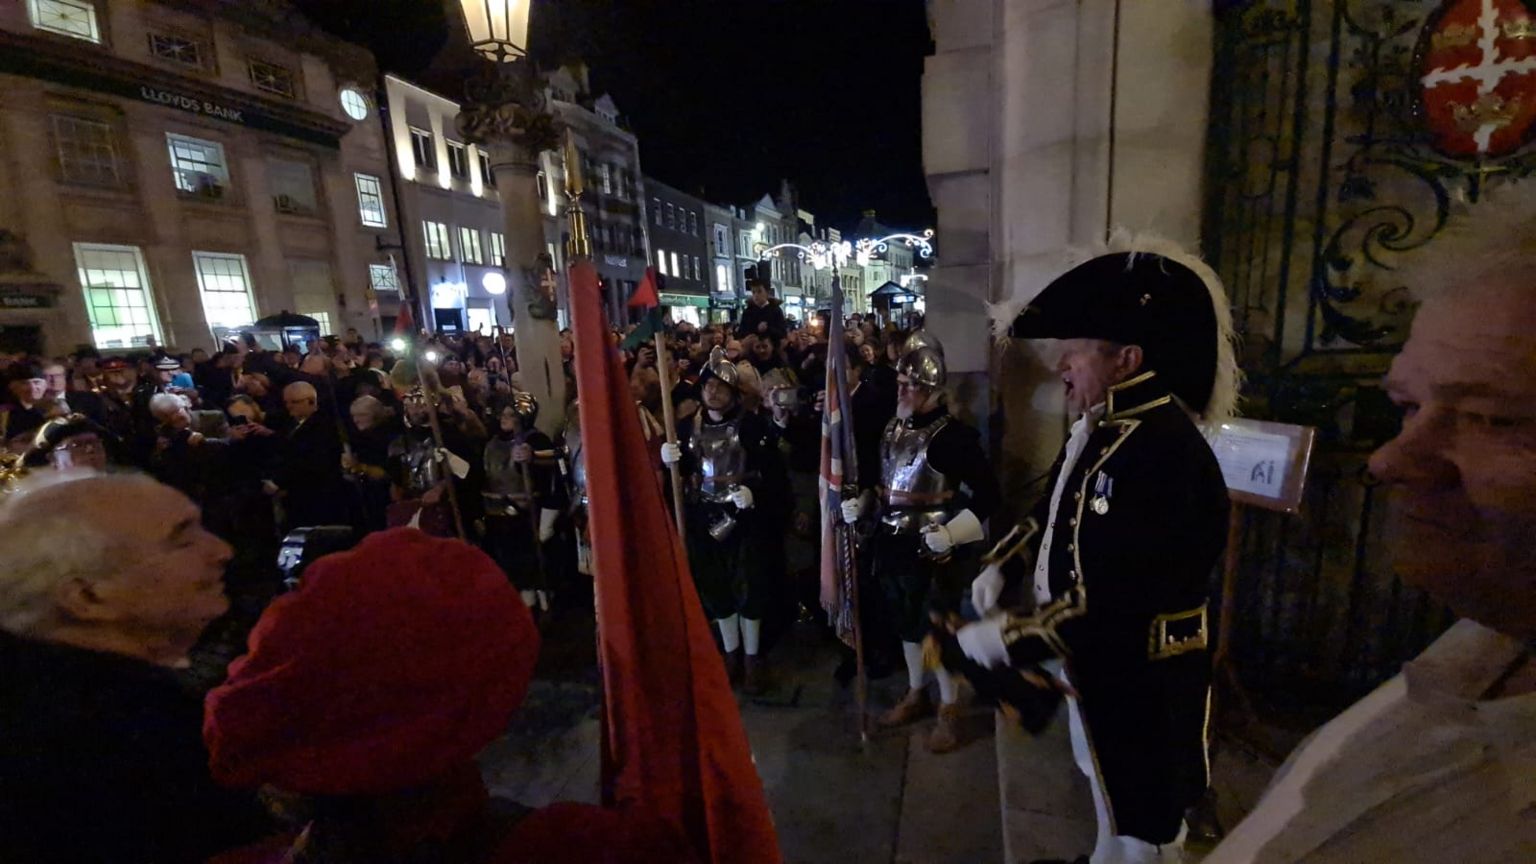 Scores of people gathered to hear the proclamation of Town Crier Robert Needham, who invited those present to join him in celebrating the granting of city status